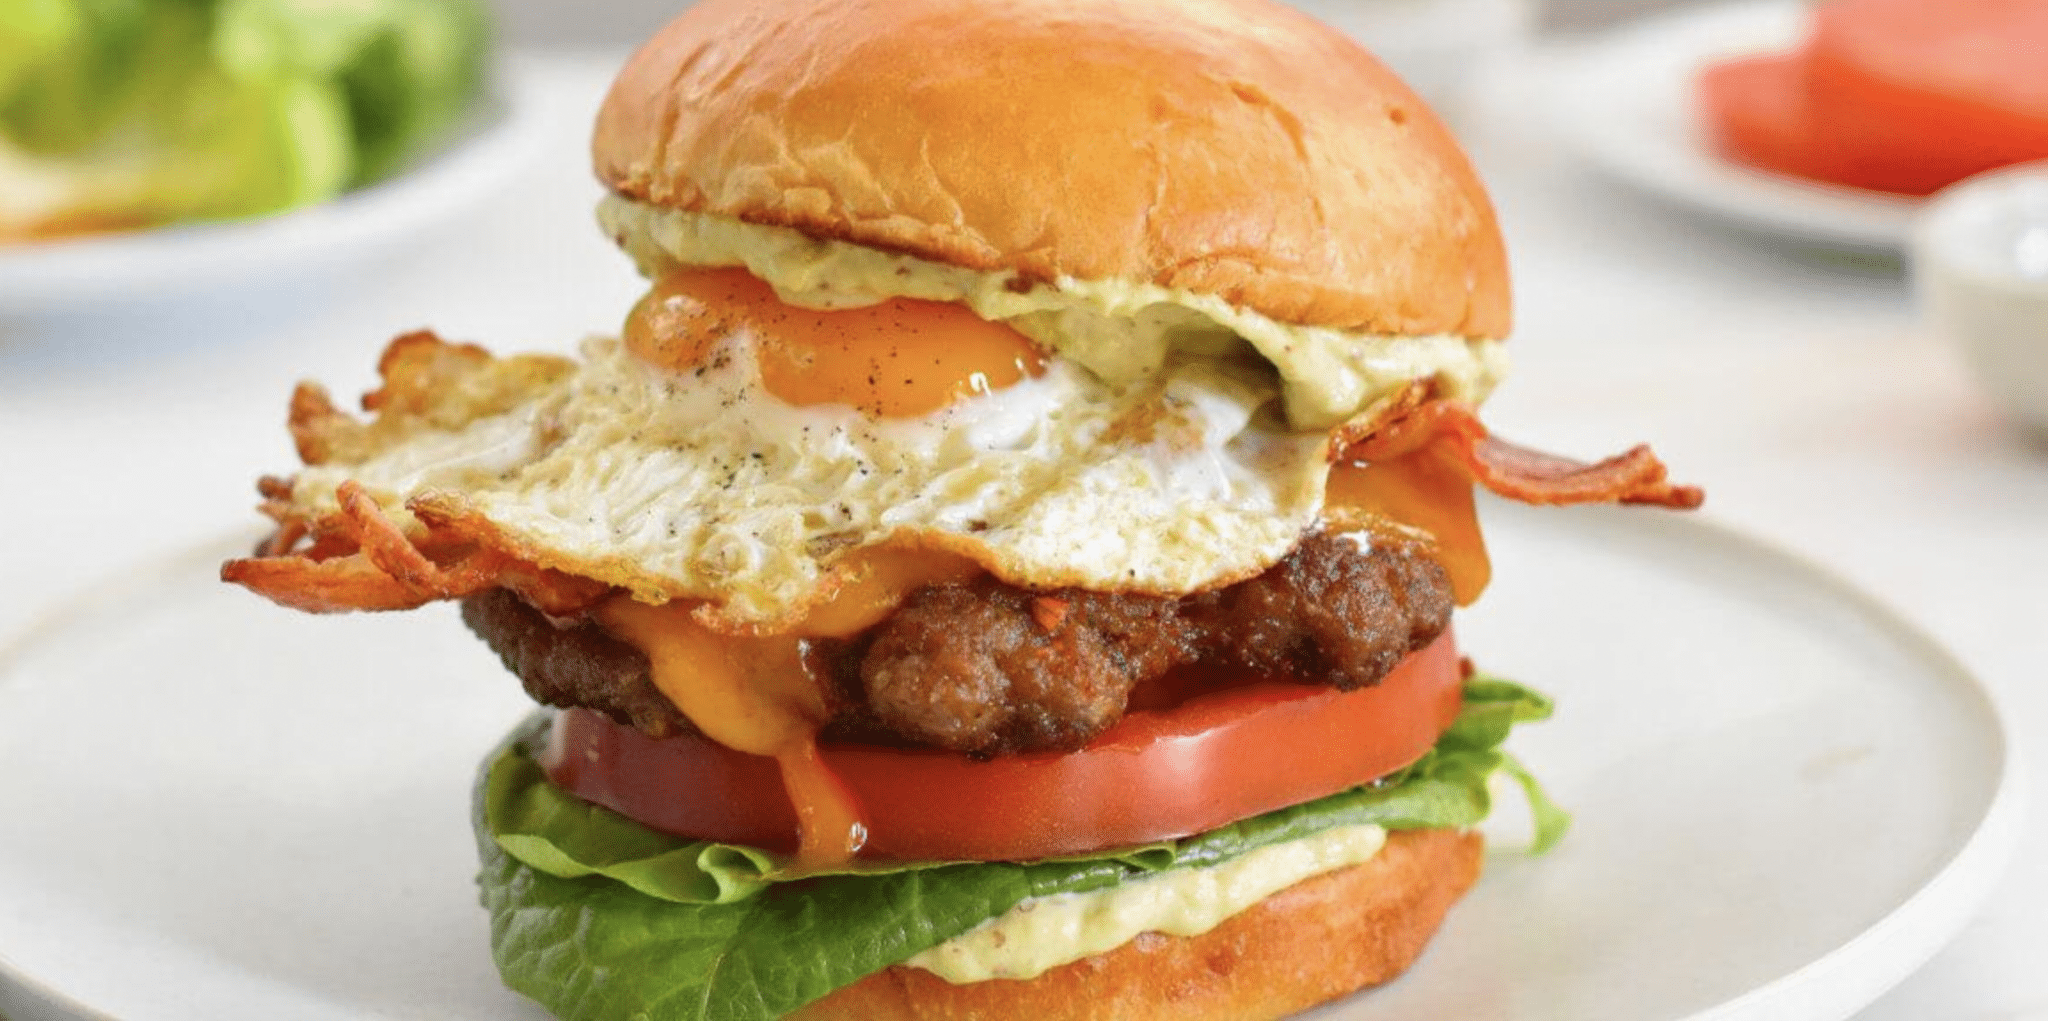 Swaggerty's Sausage breakfast sandwich with bun, egg, bacon, cheese, sausage patty, tomato, and lettuce.